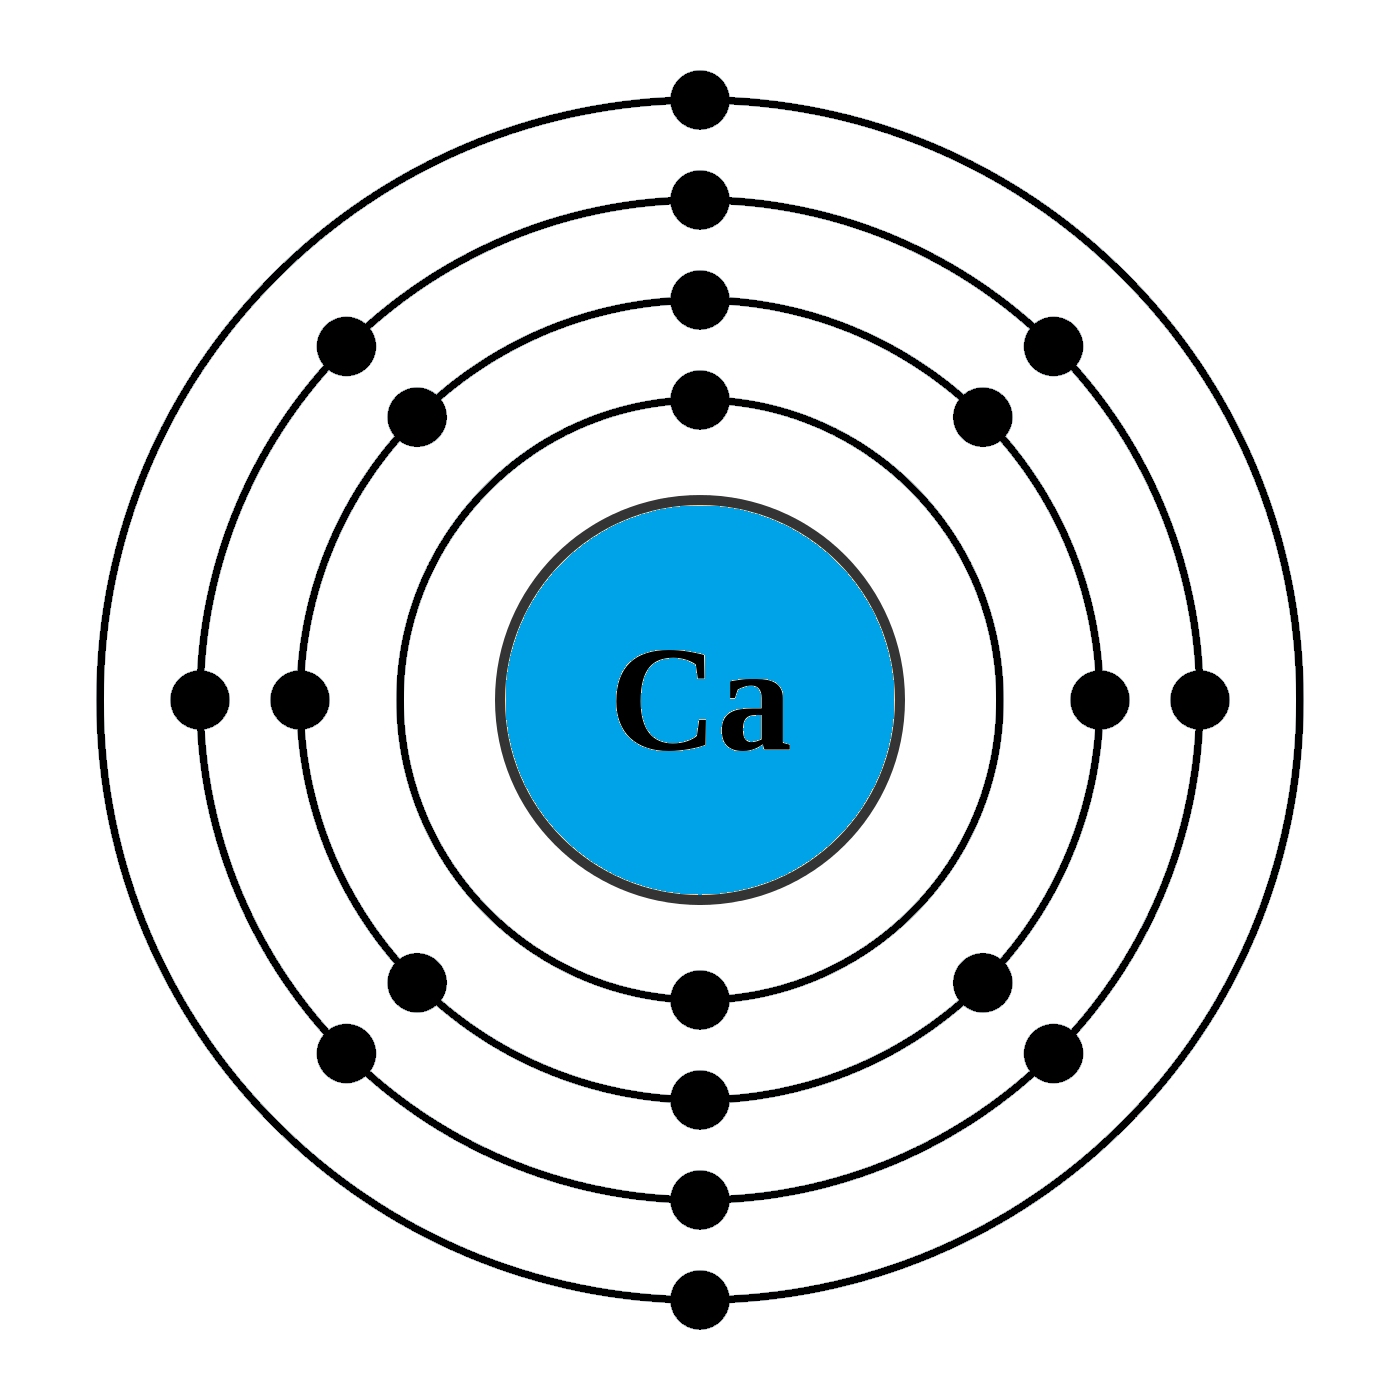 How can I draw electronic configuration of calcium in a shell - nxwe70dd